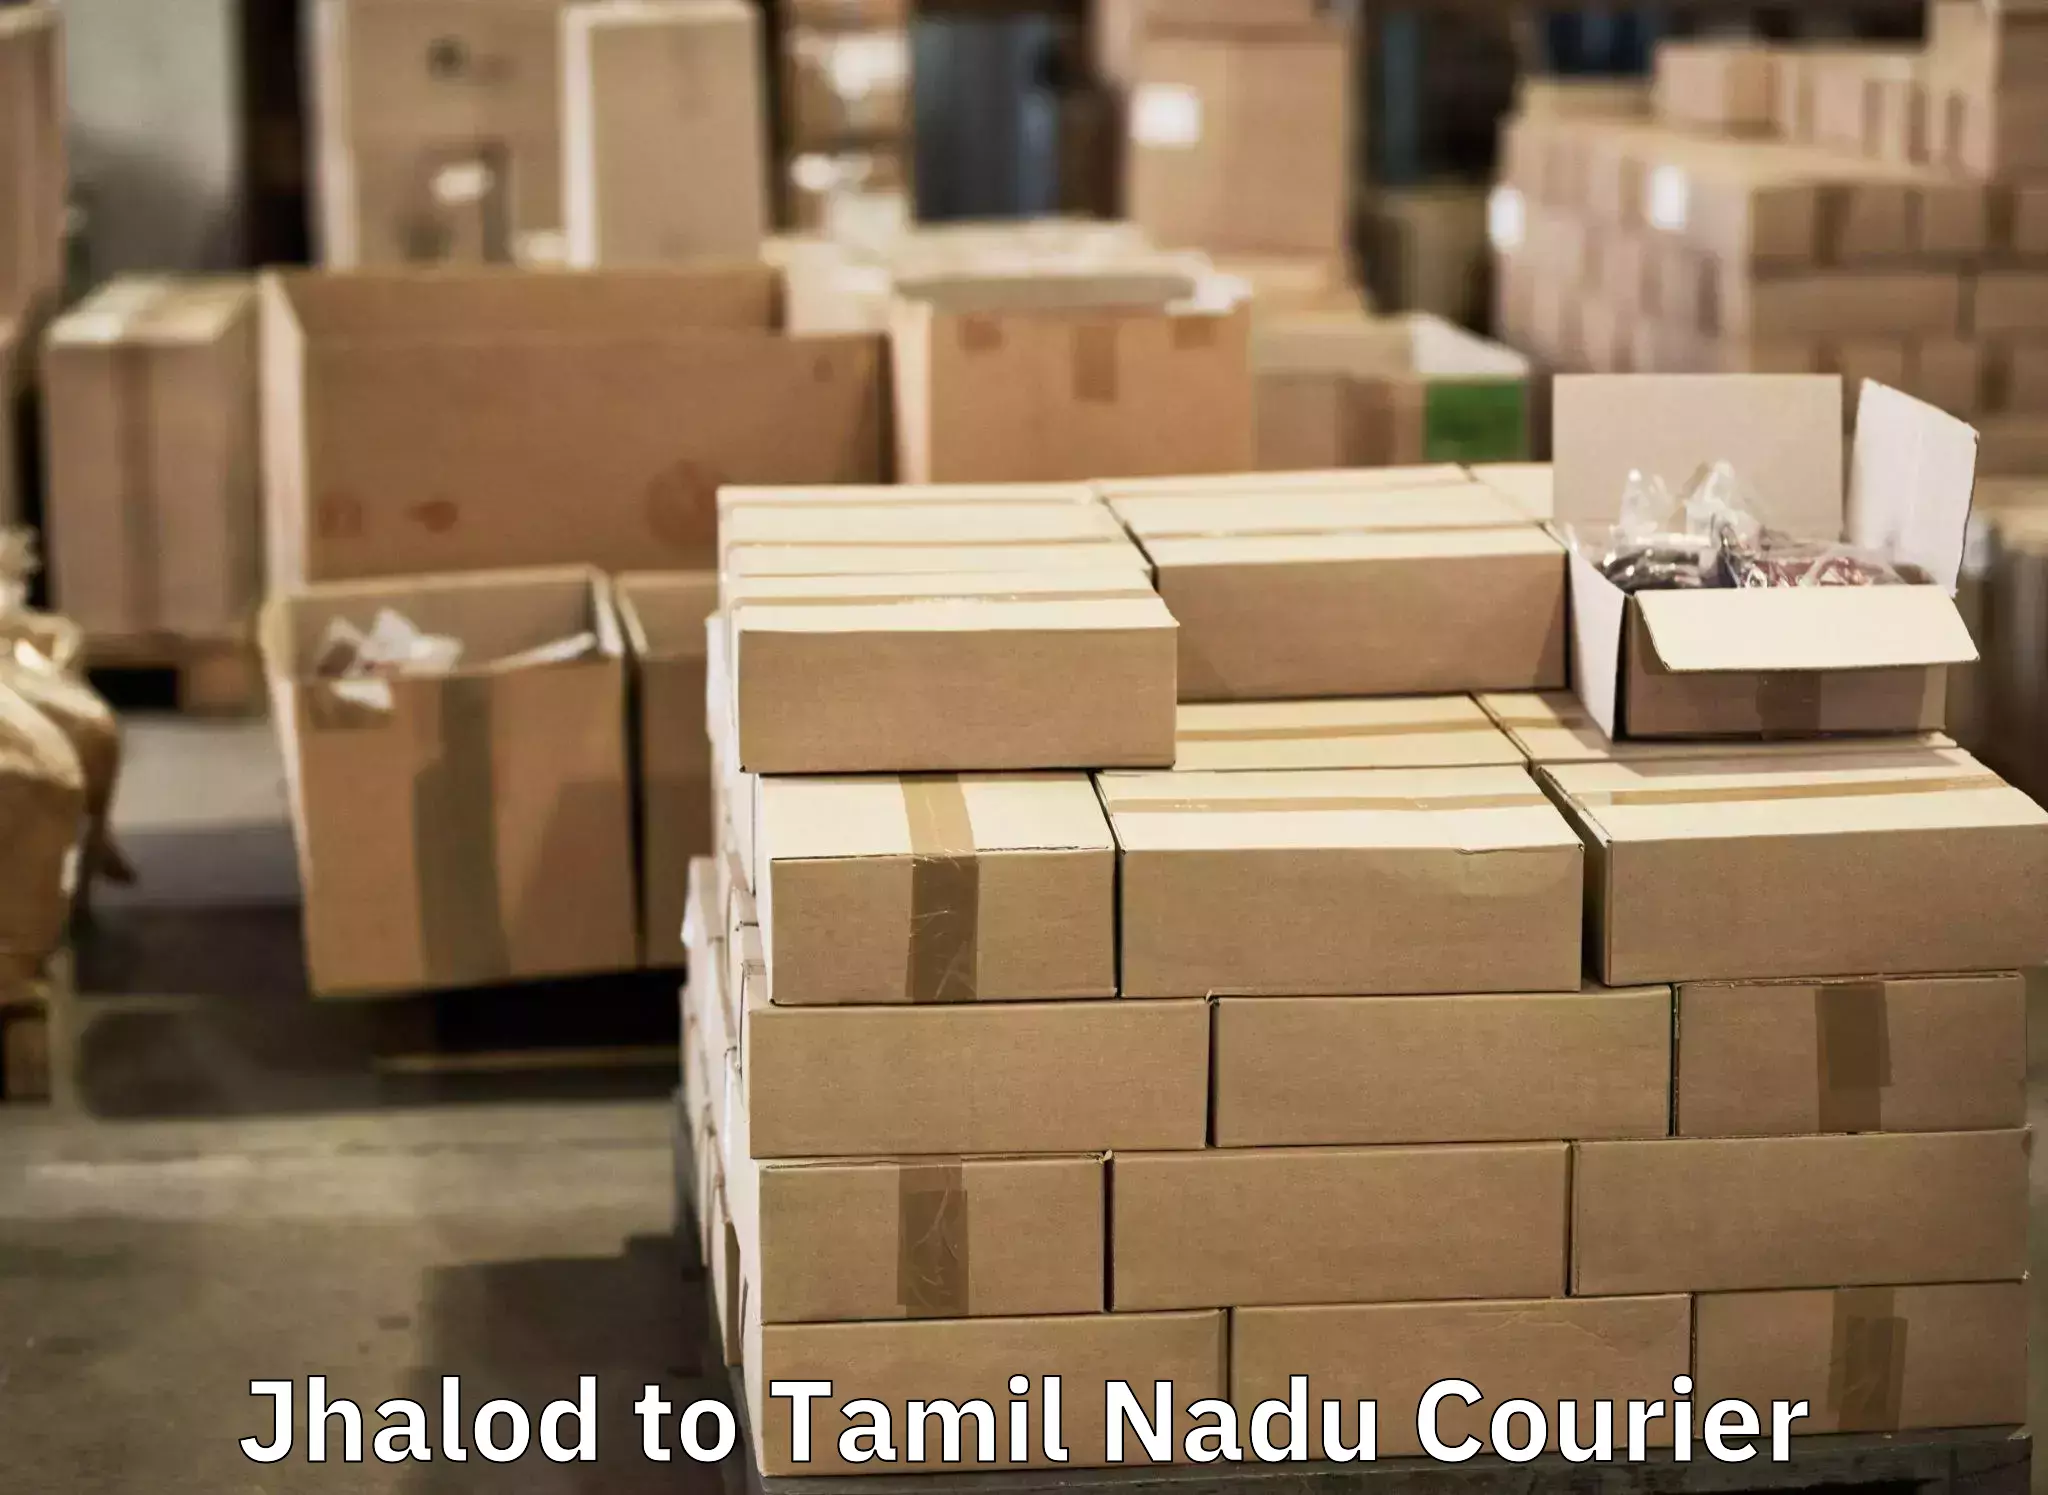 Personal effects shipping in Jhalod to Karur